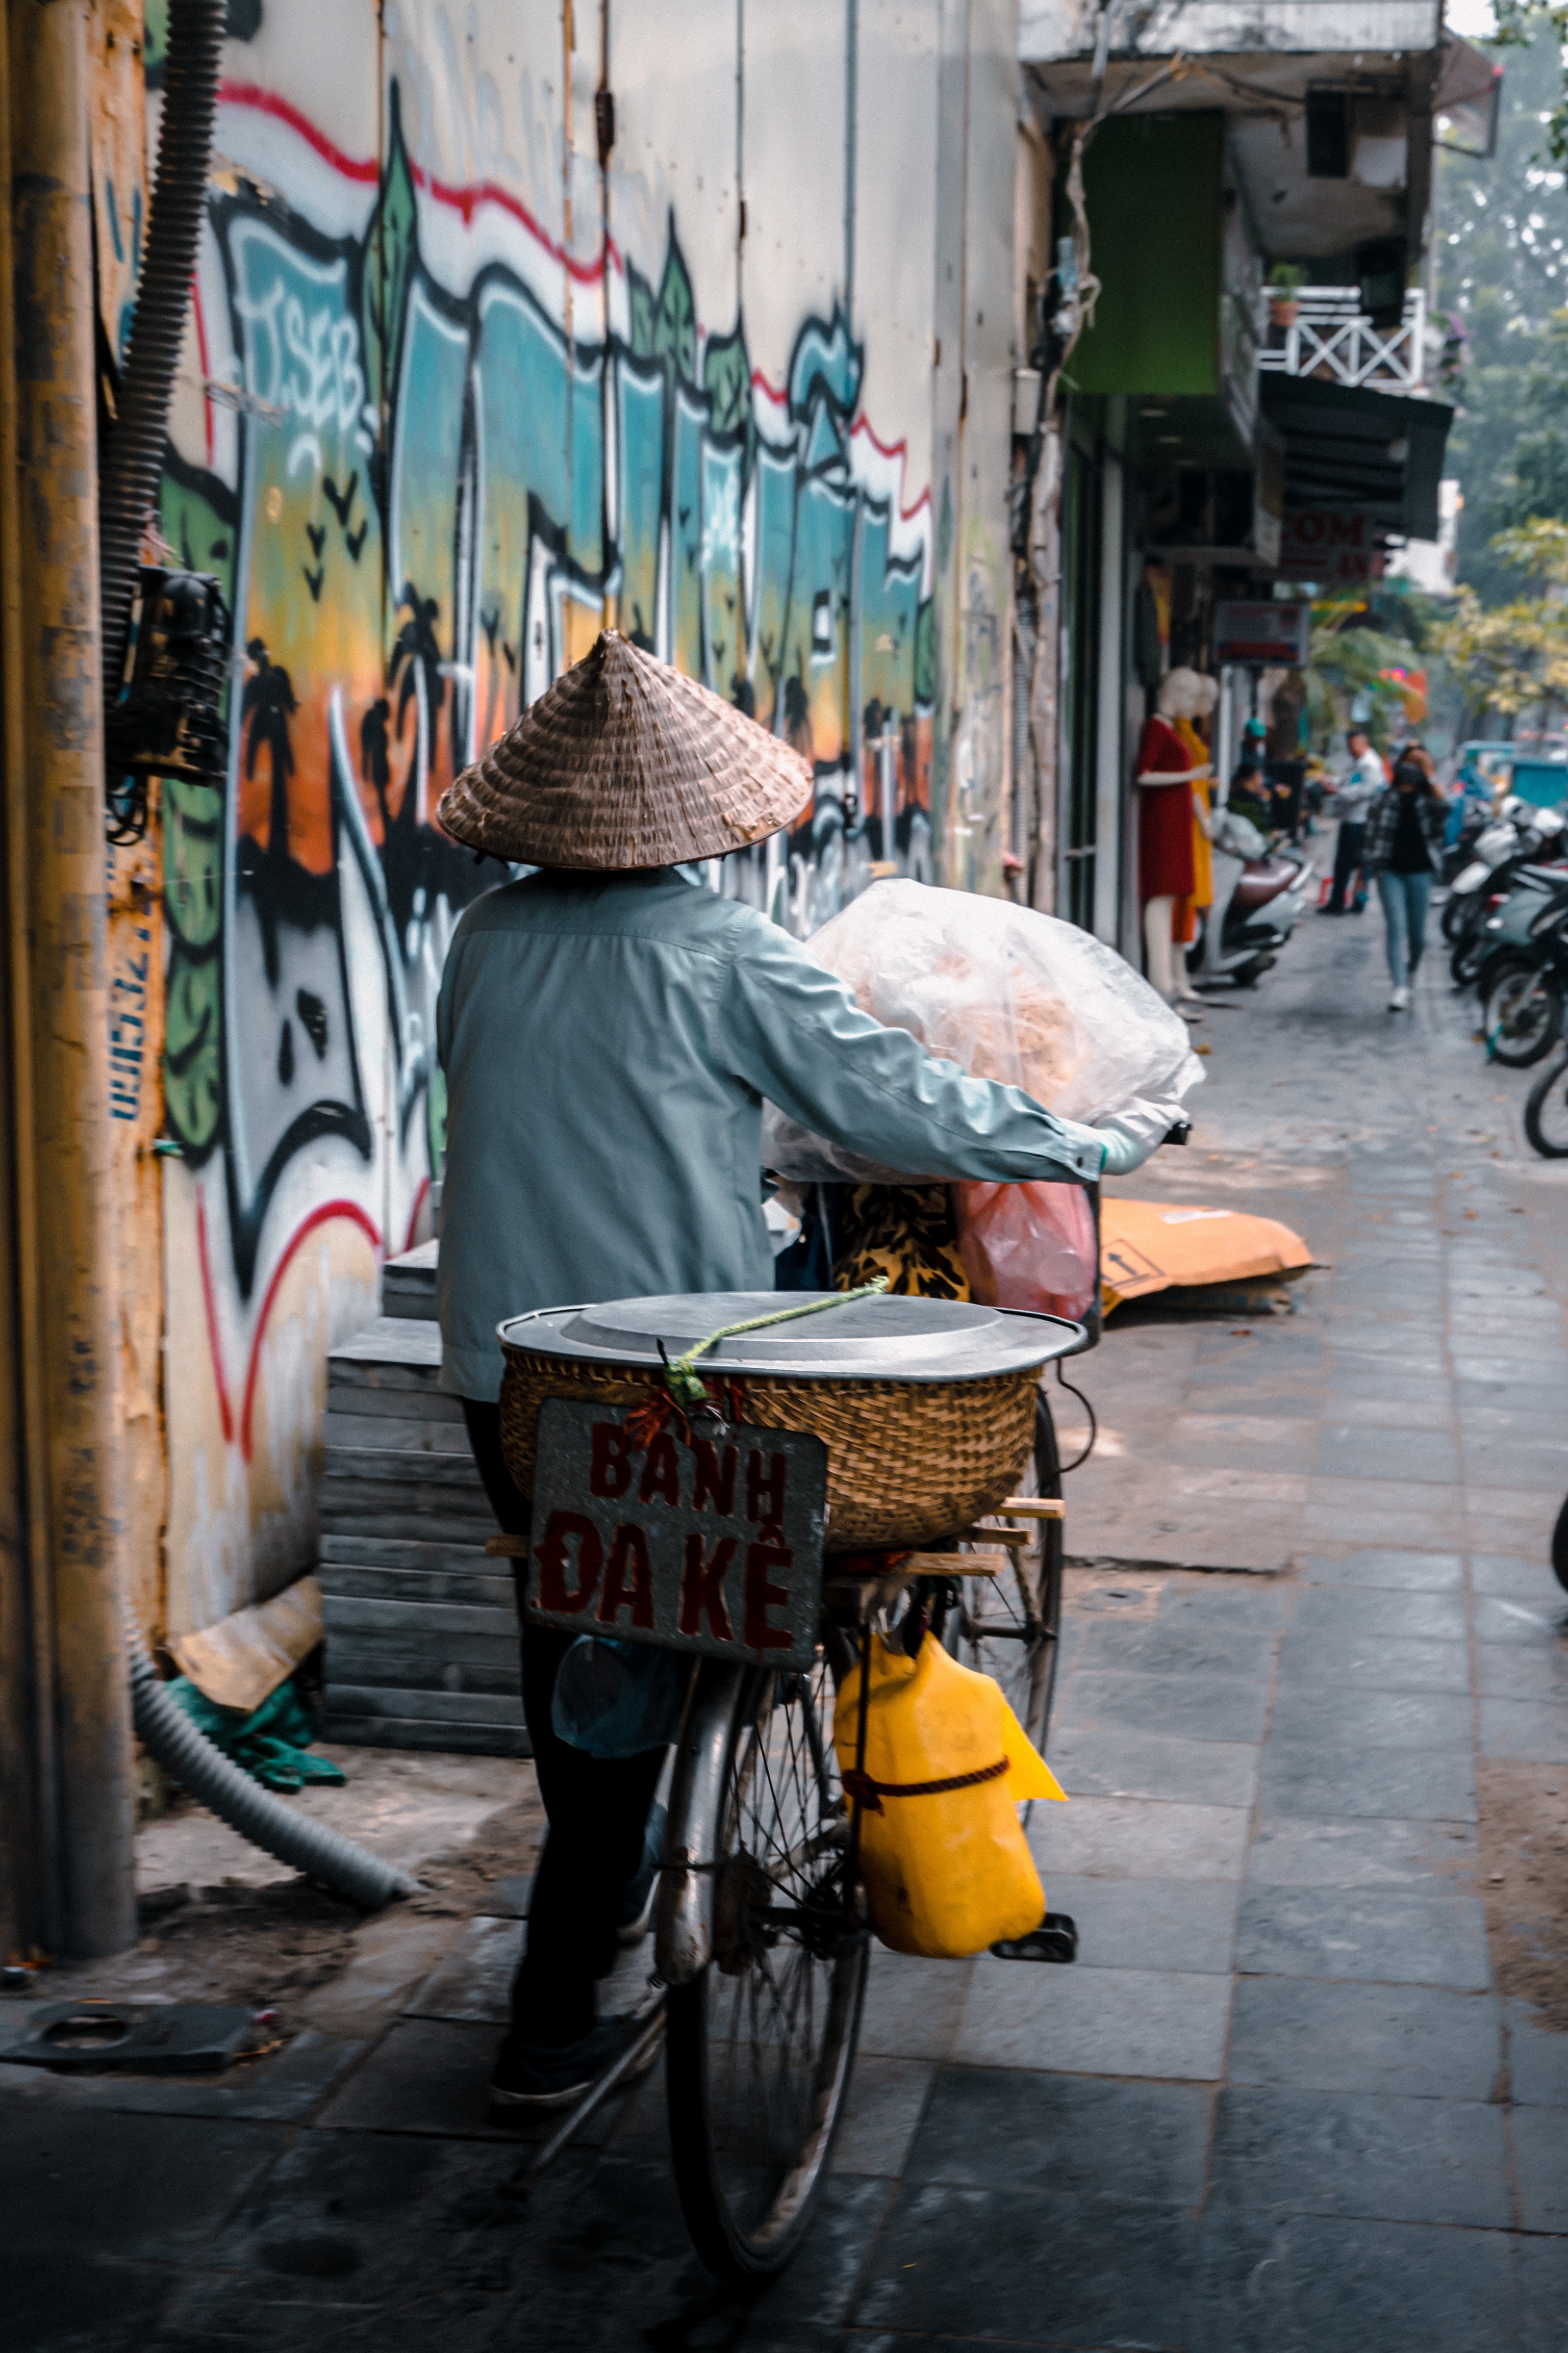 Things to see in Hanoi: 